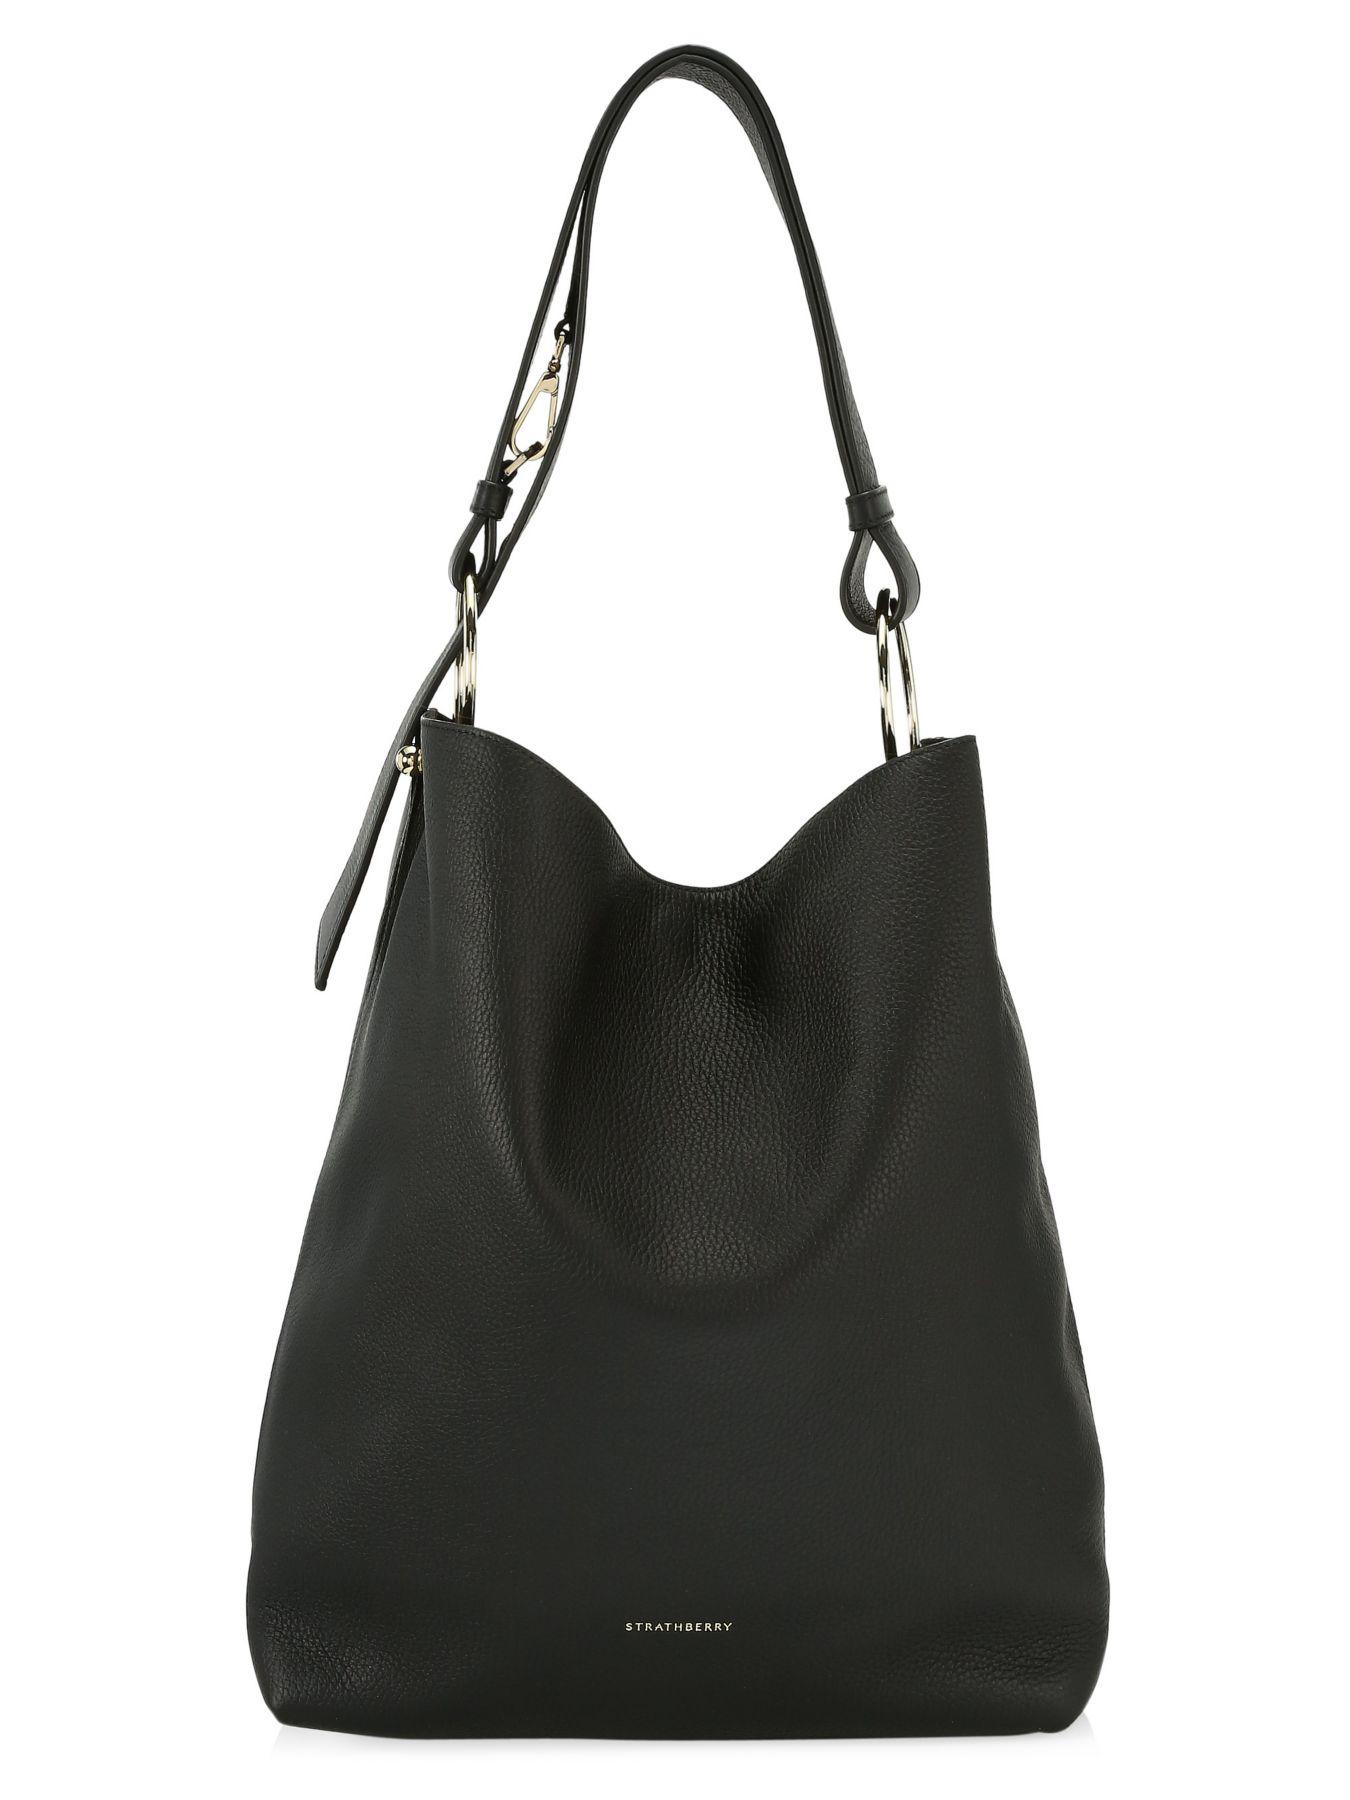 Strathberry Lana Leather Hobo Bag in Black - Lyst